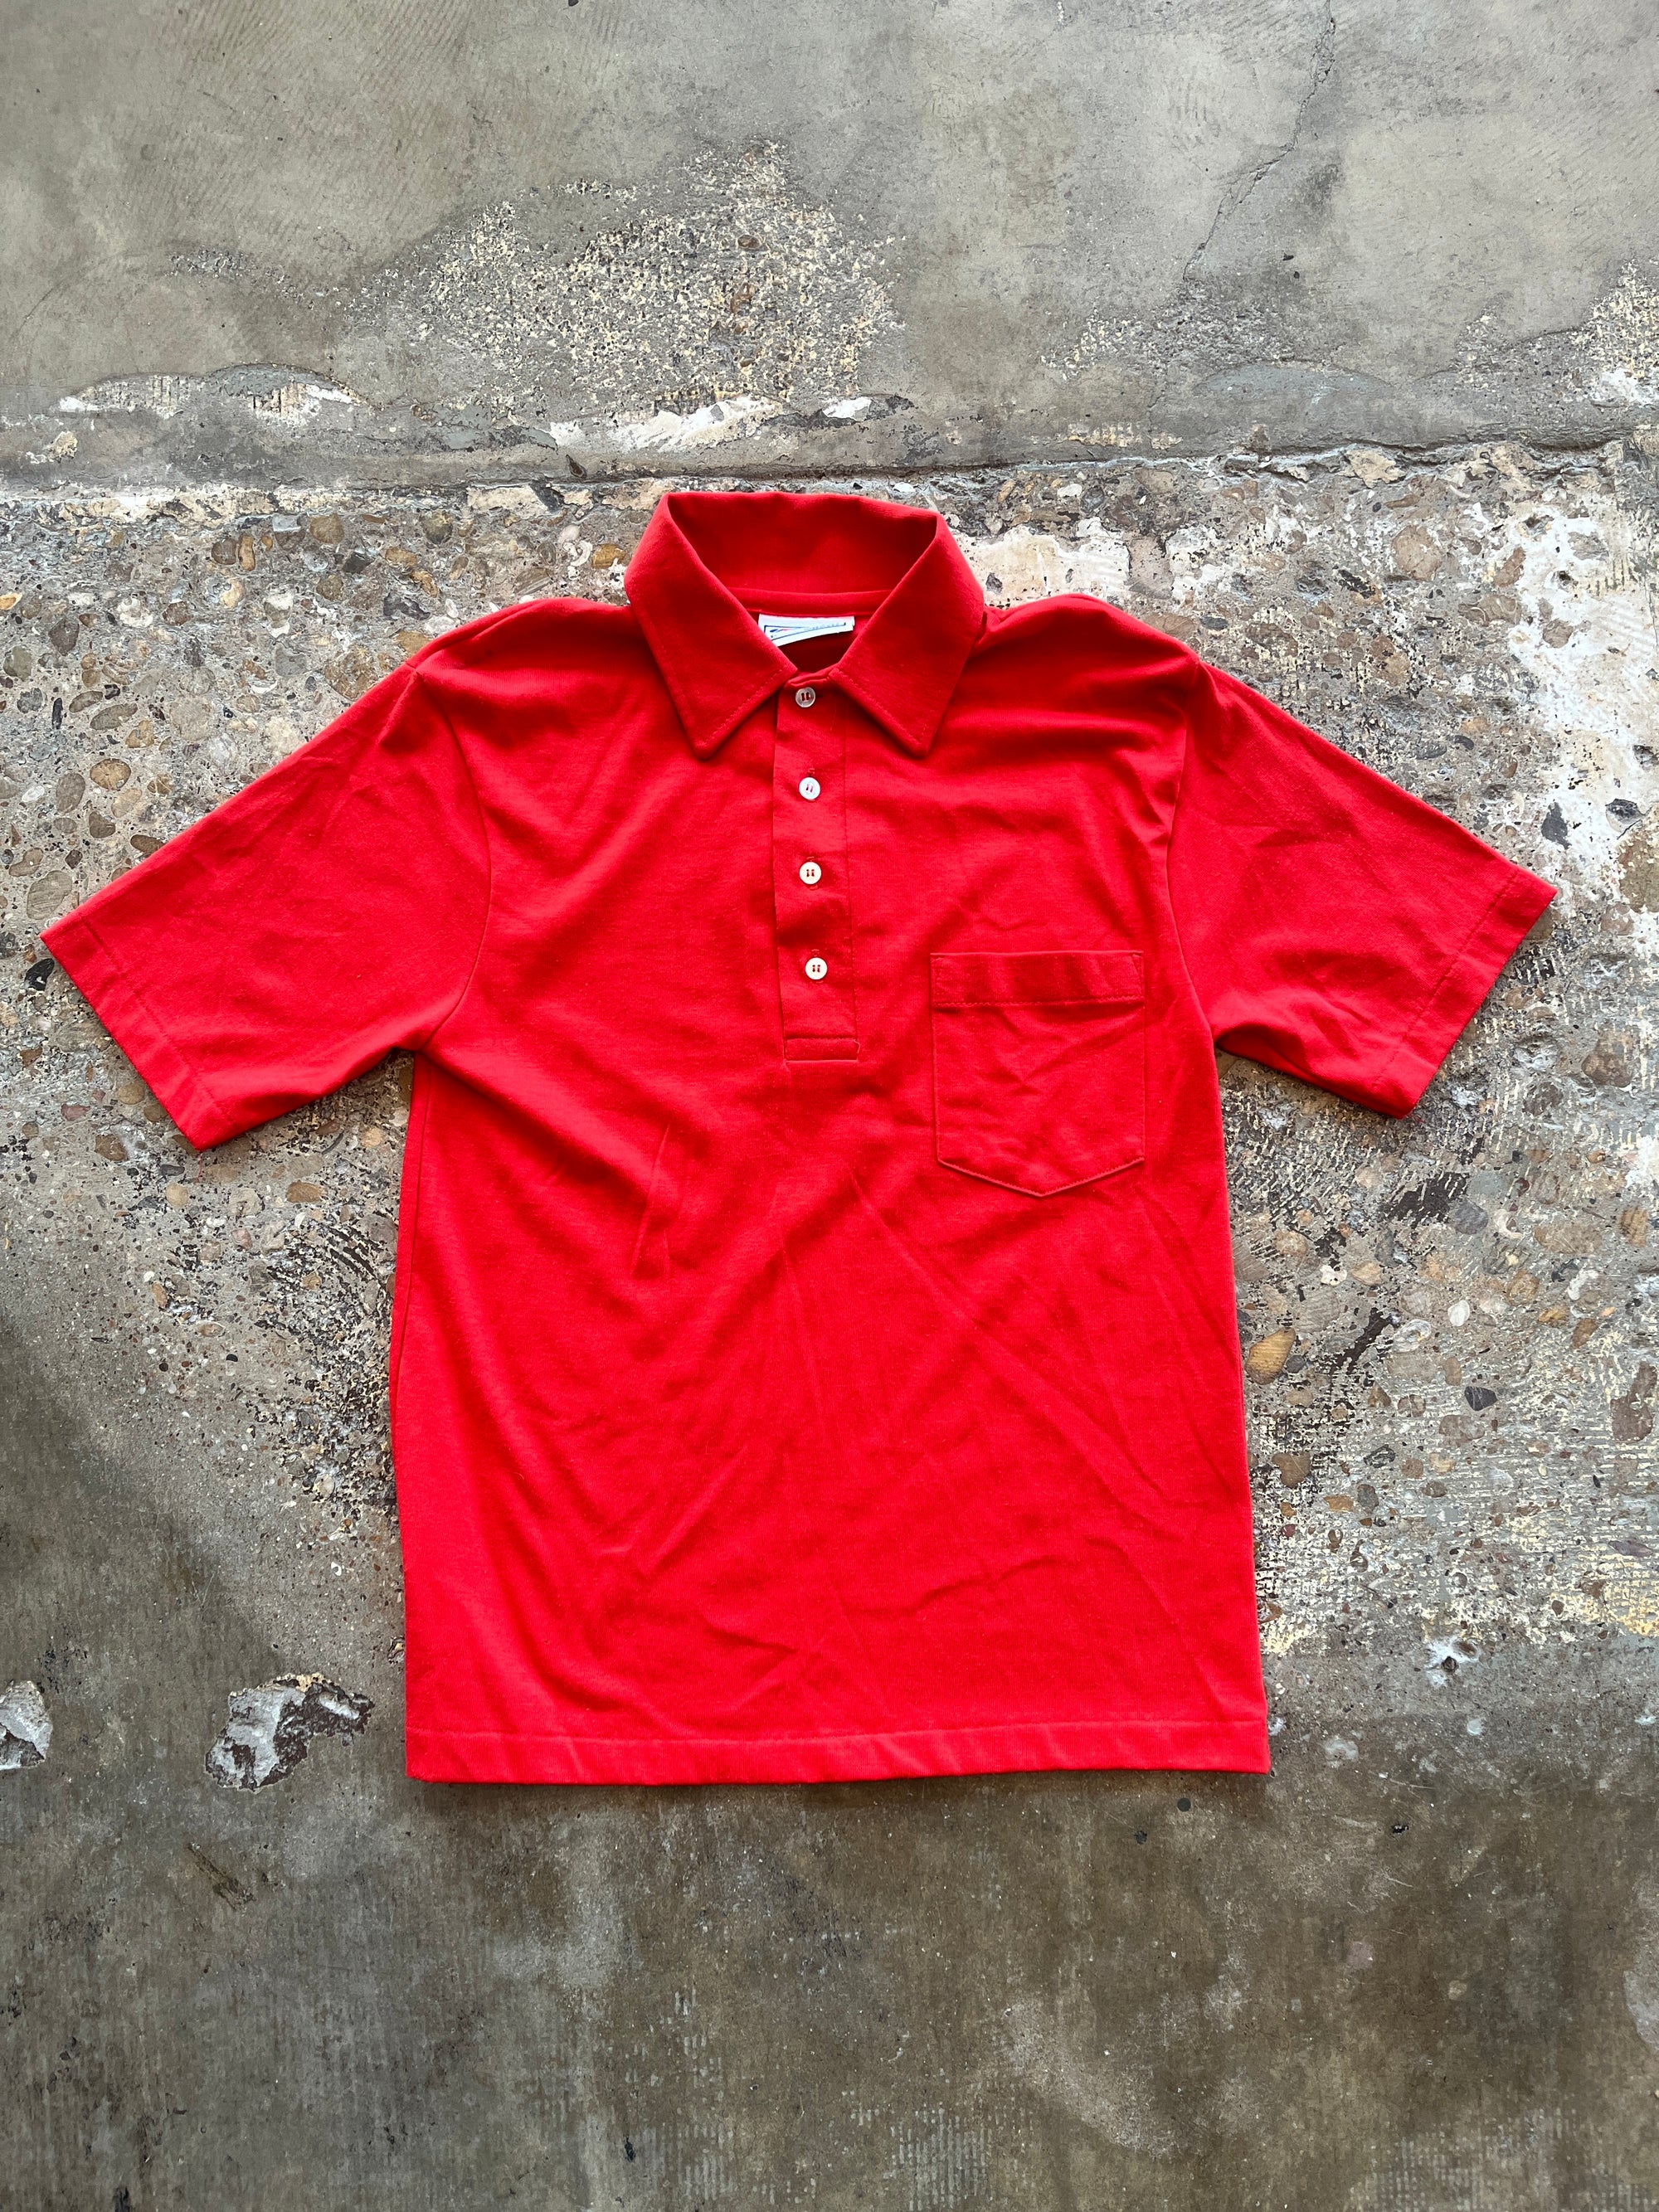 1989 Red Hanes Sports Car Polo